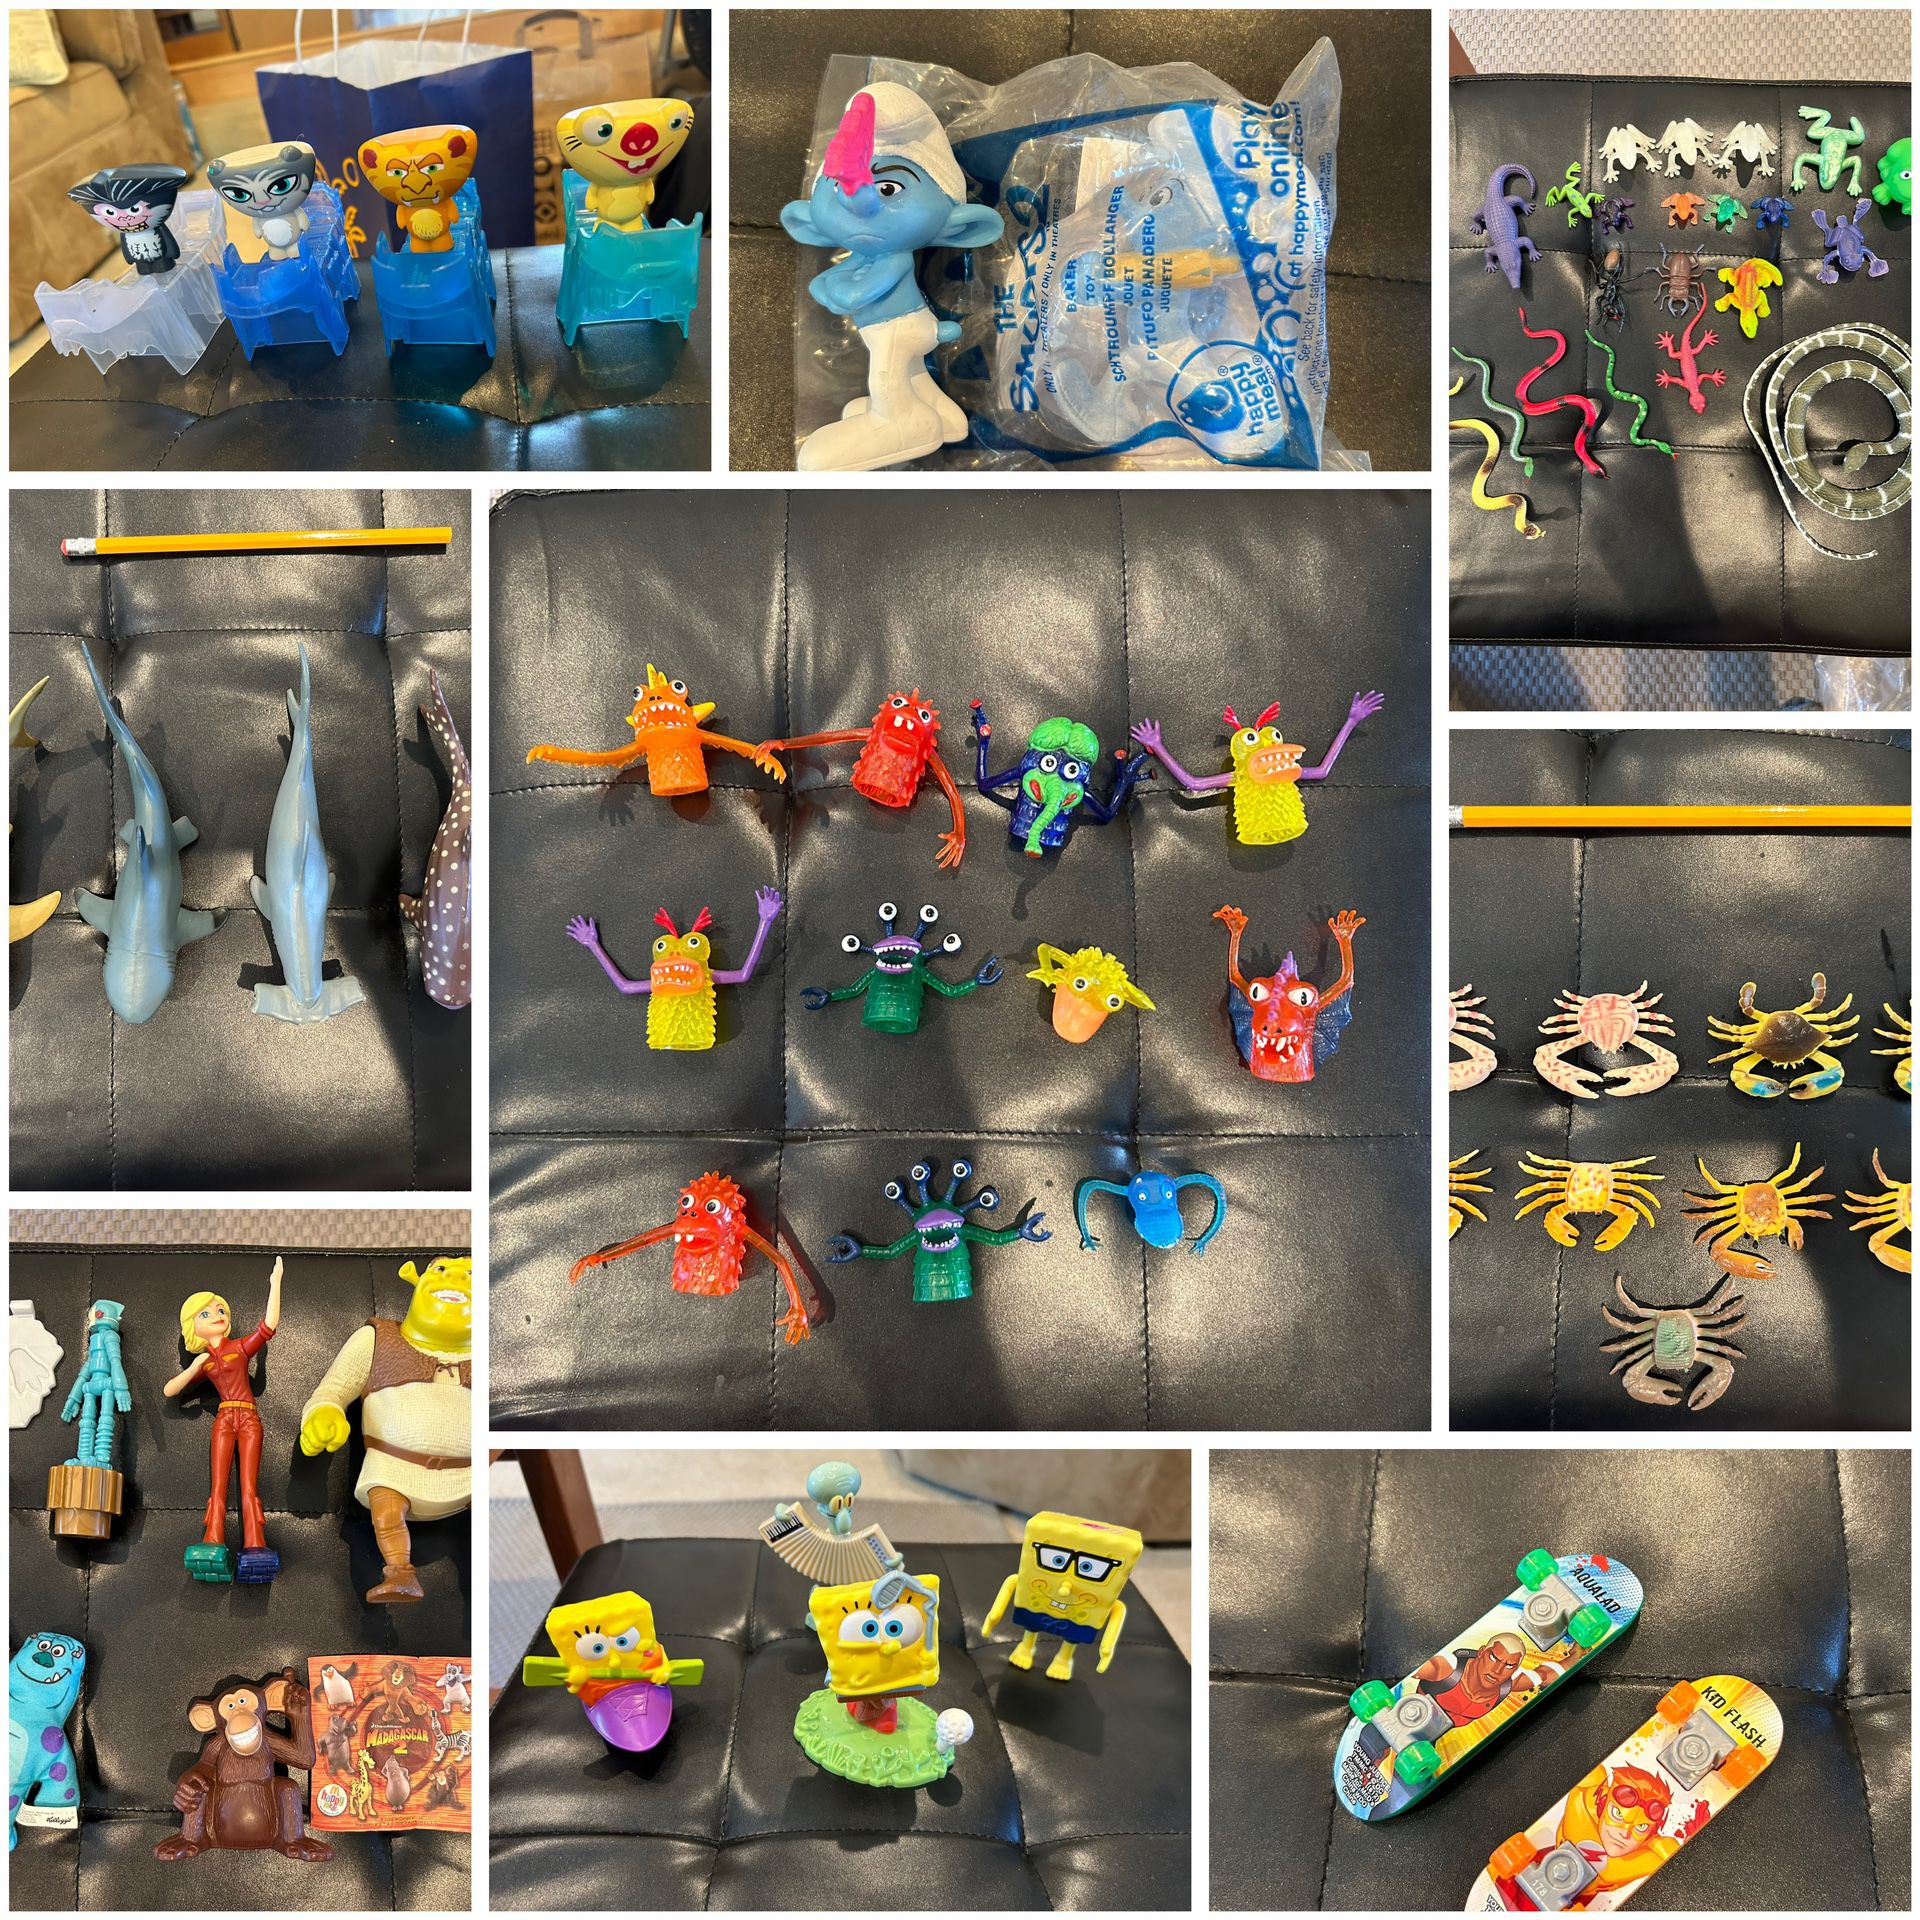 A Bunch Of Organized And Cleaned Random Toys That We’re Looking To Get Rid Of